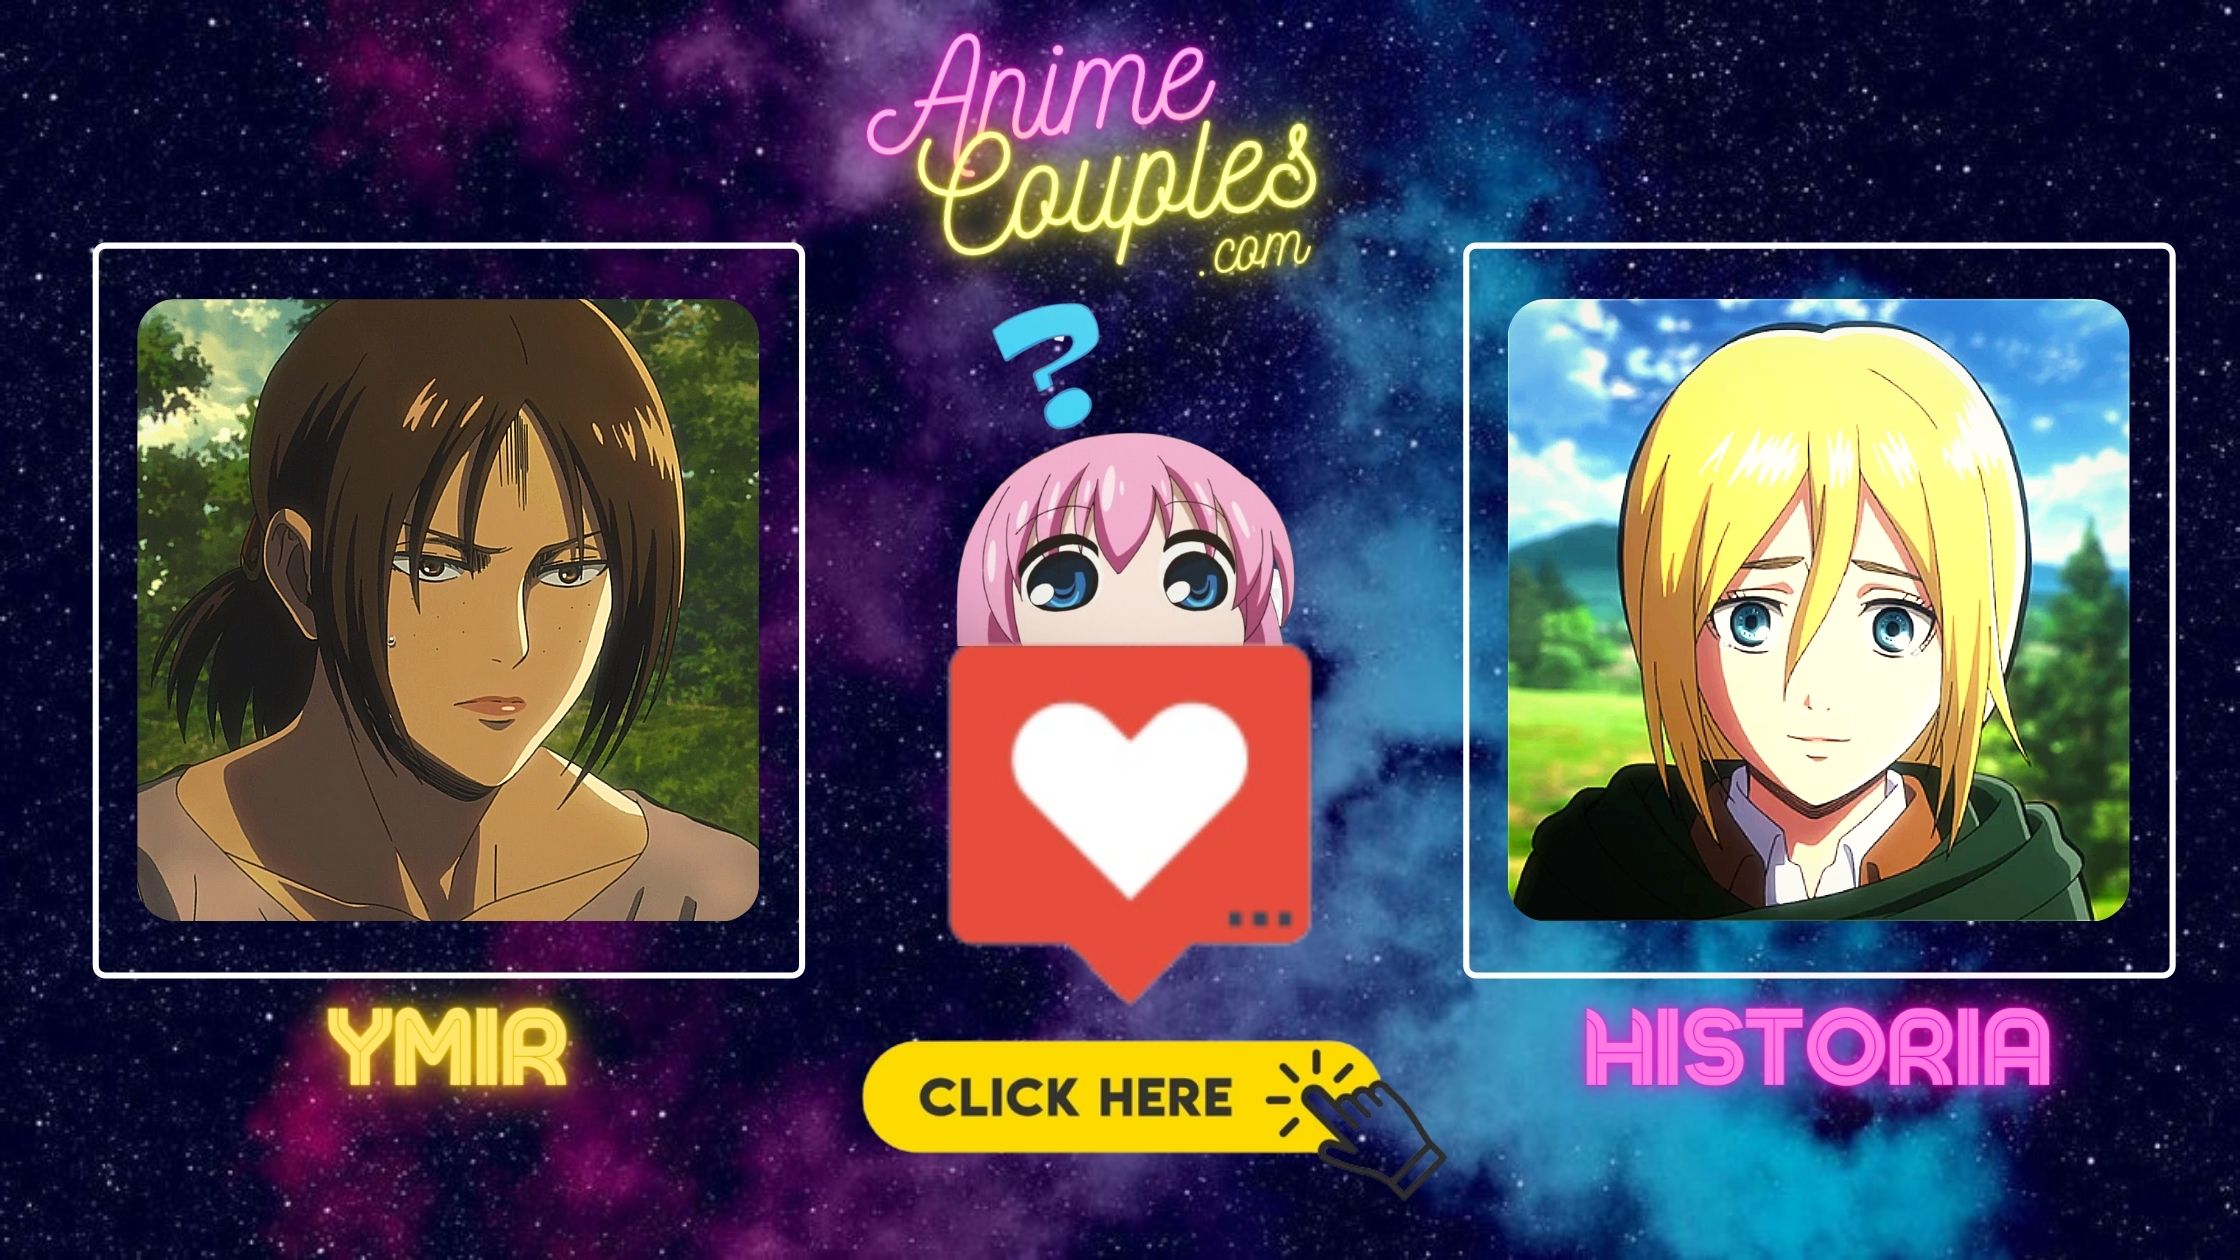 ymir and historia - Attack on Titan couples